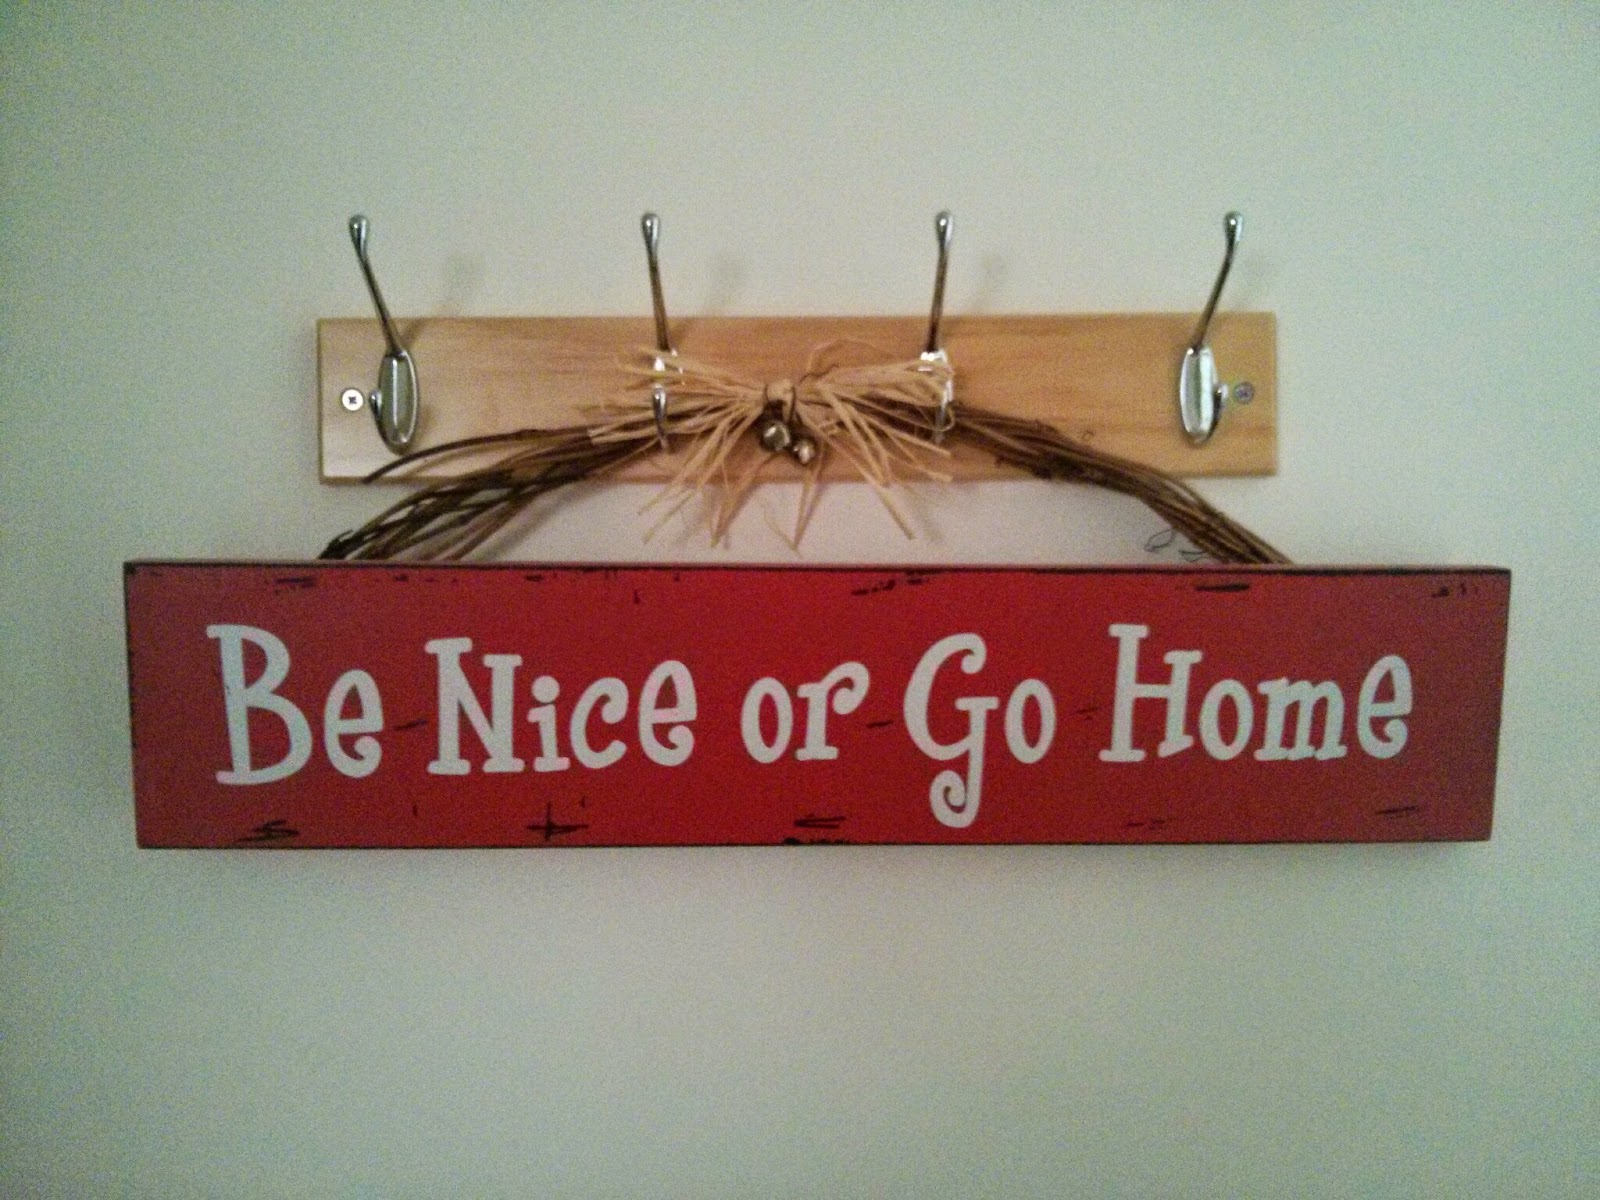 Be Nice or Go Home sign